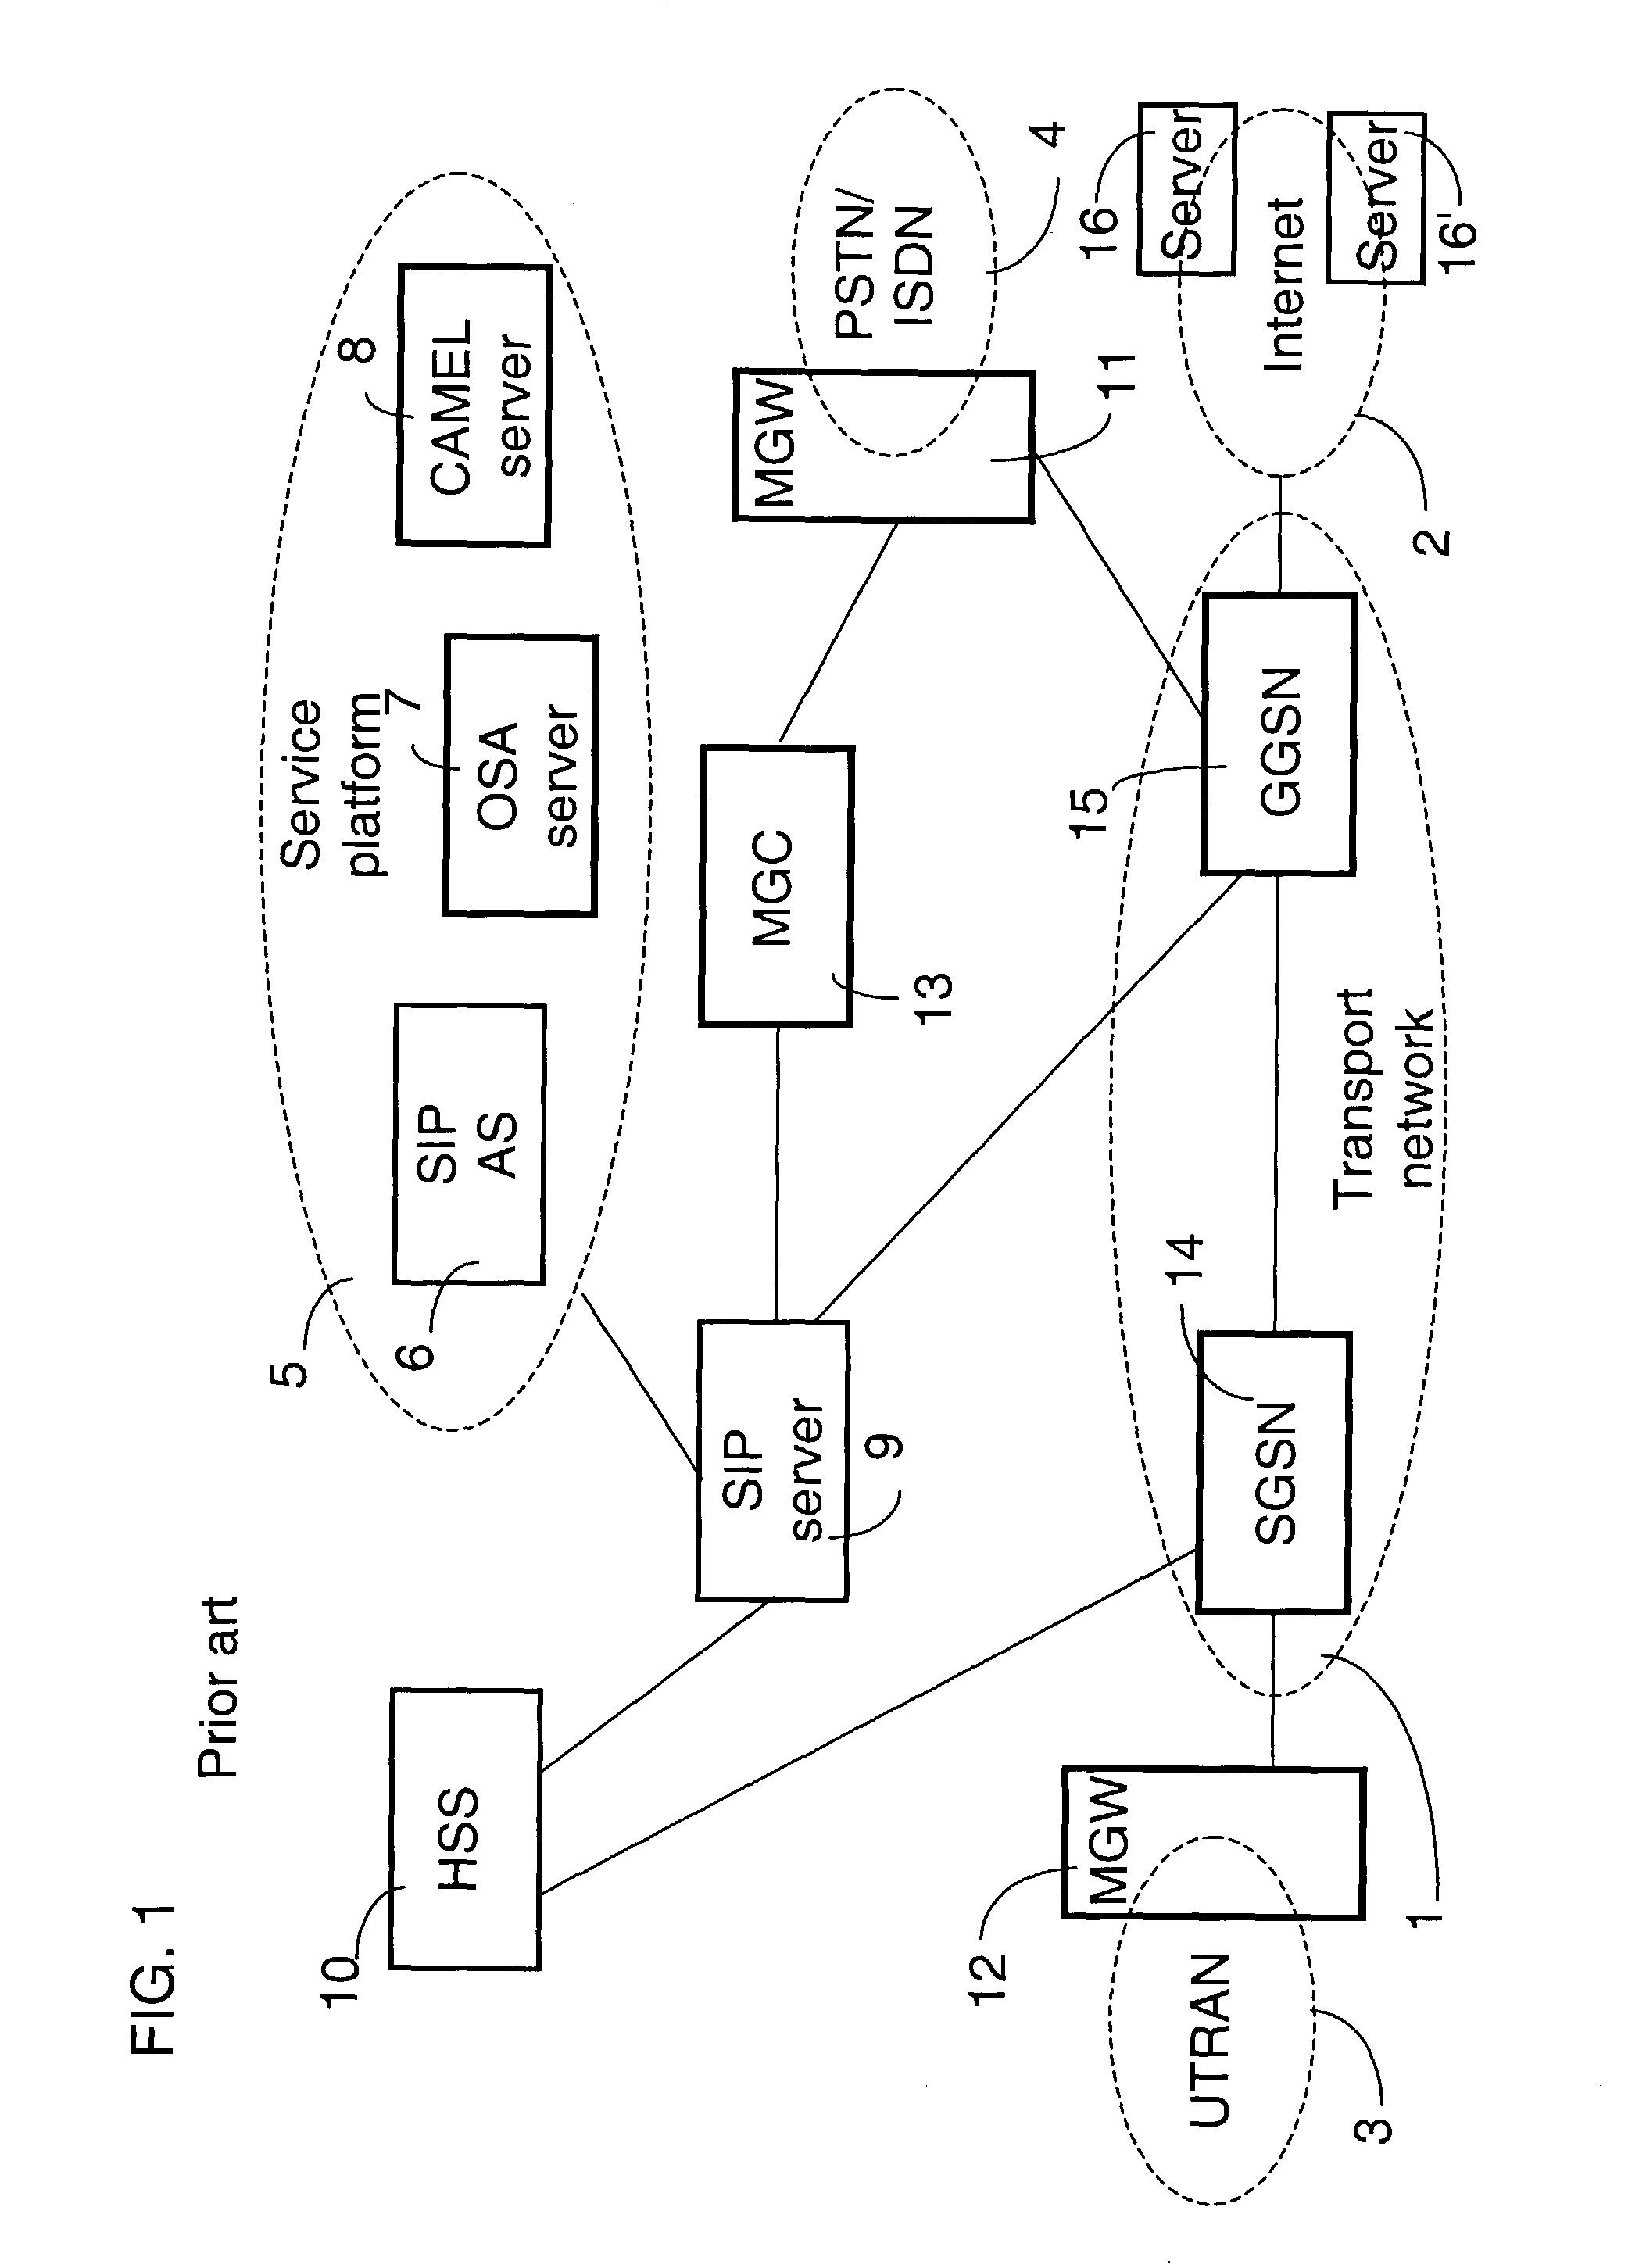 Method for flexible charging of IP multimedia communication sessions, telecommunication system and network elements for applying such a method